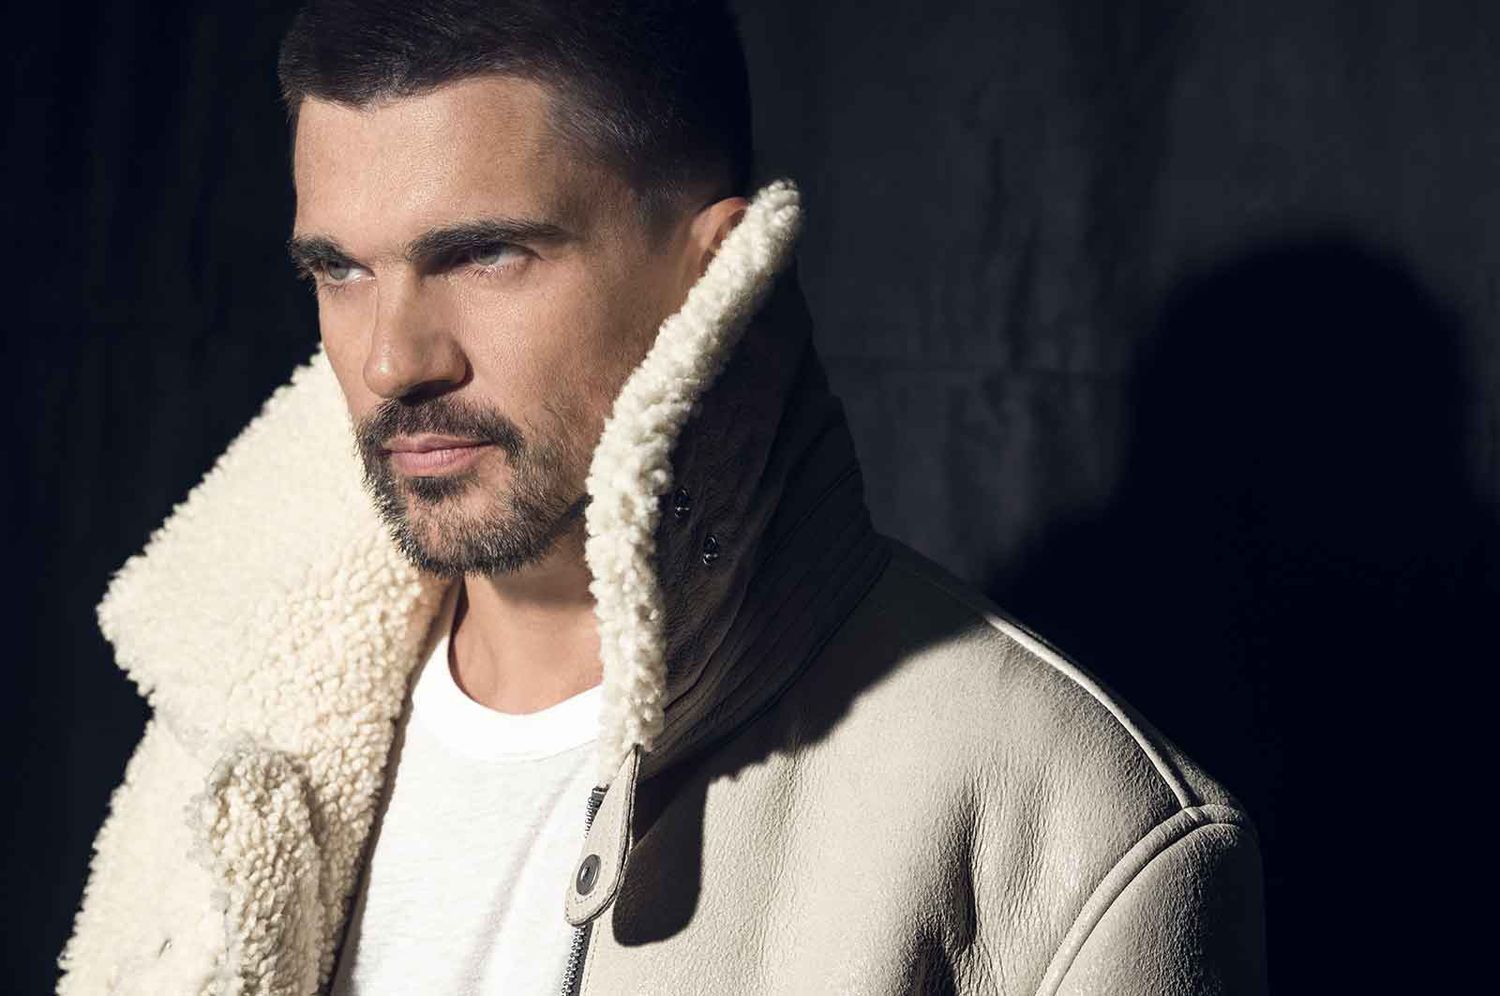 Juanes - THIS PHOTO CAN NOT BE USED